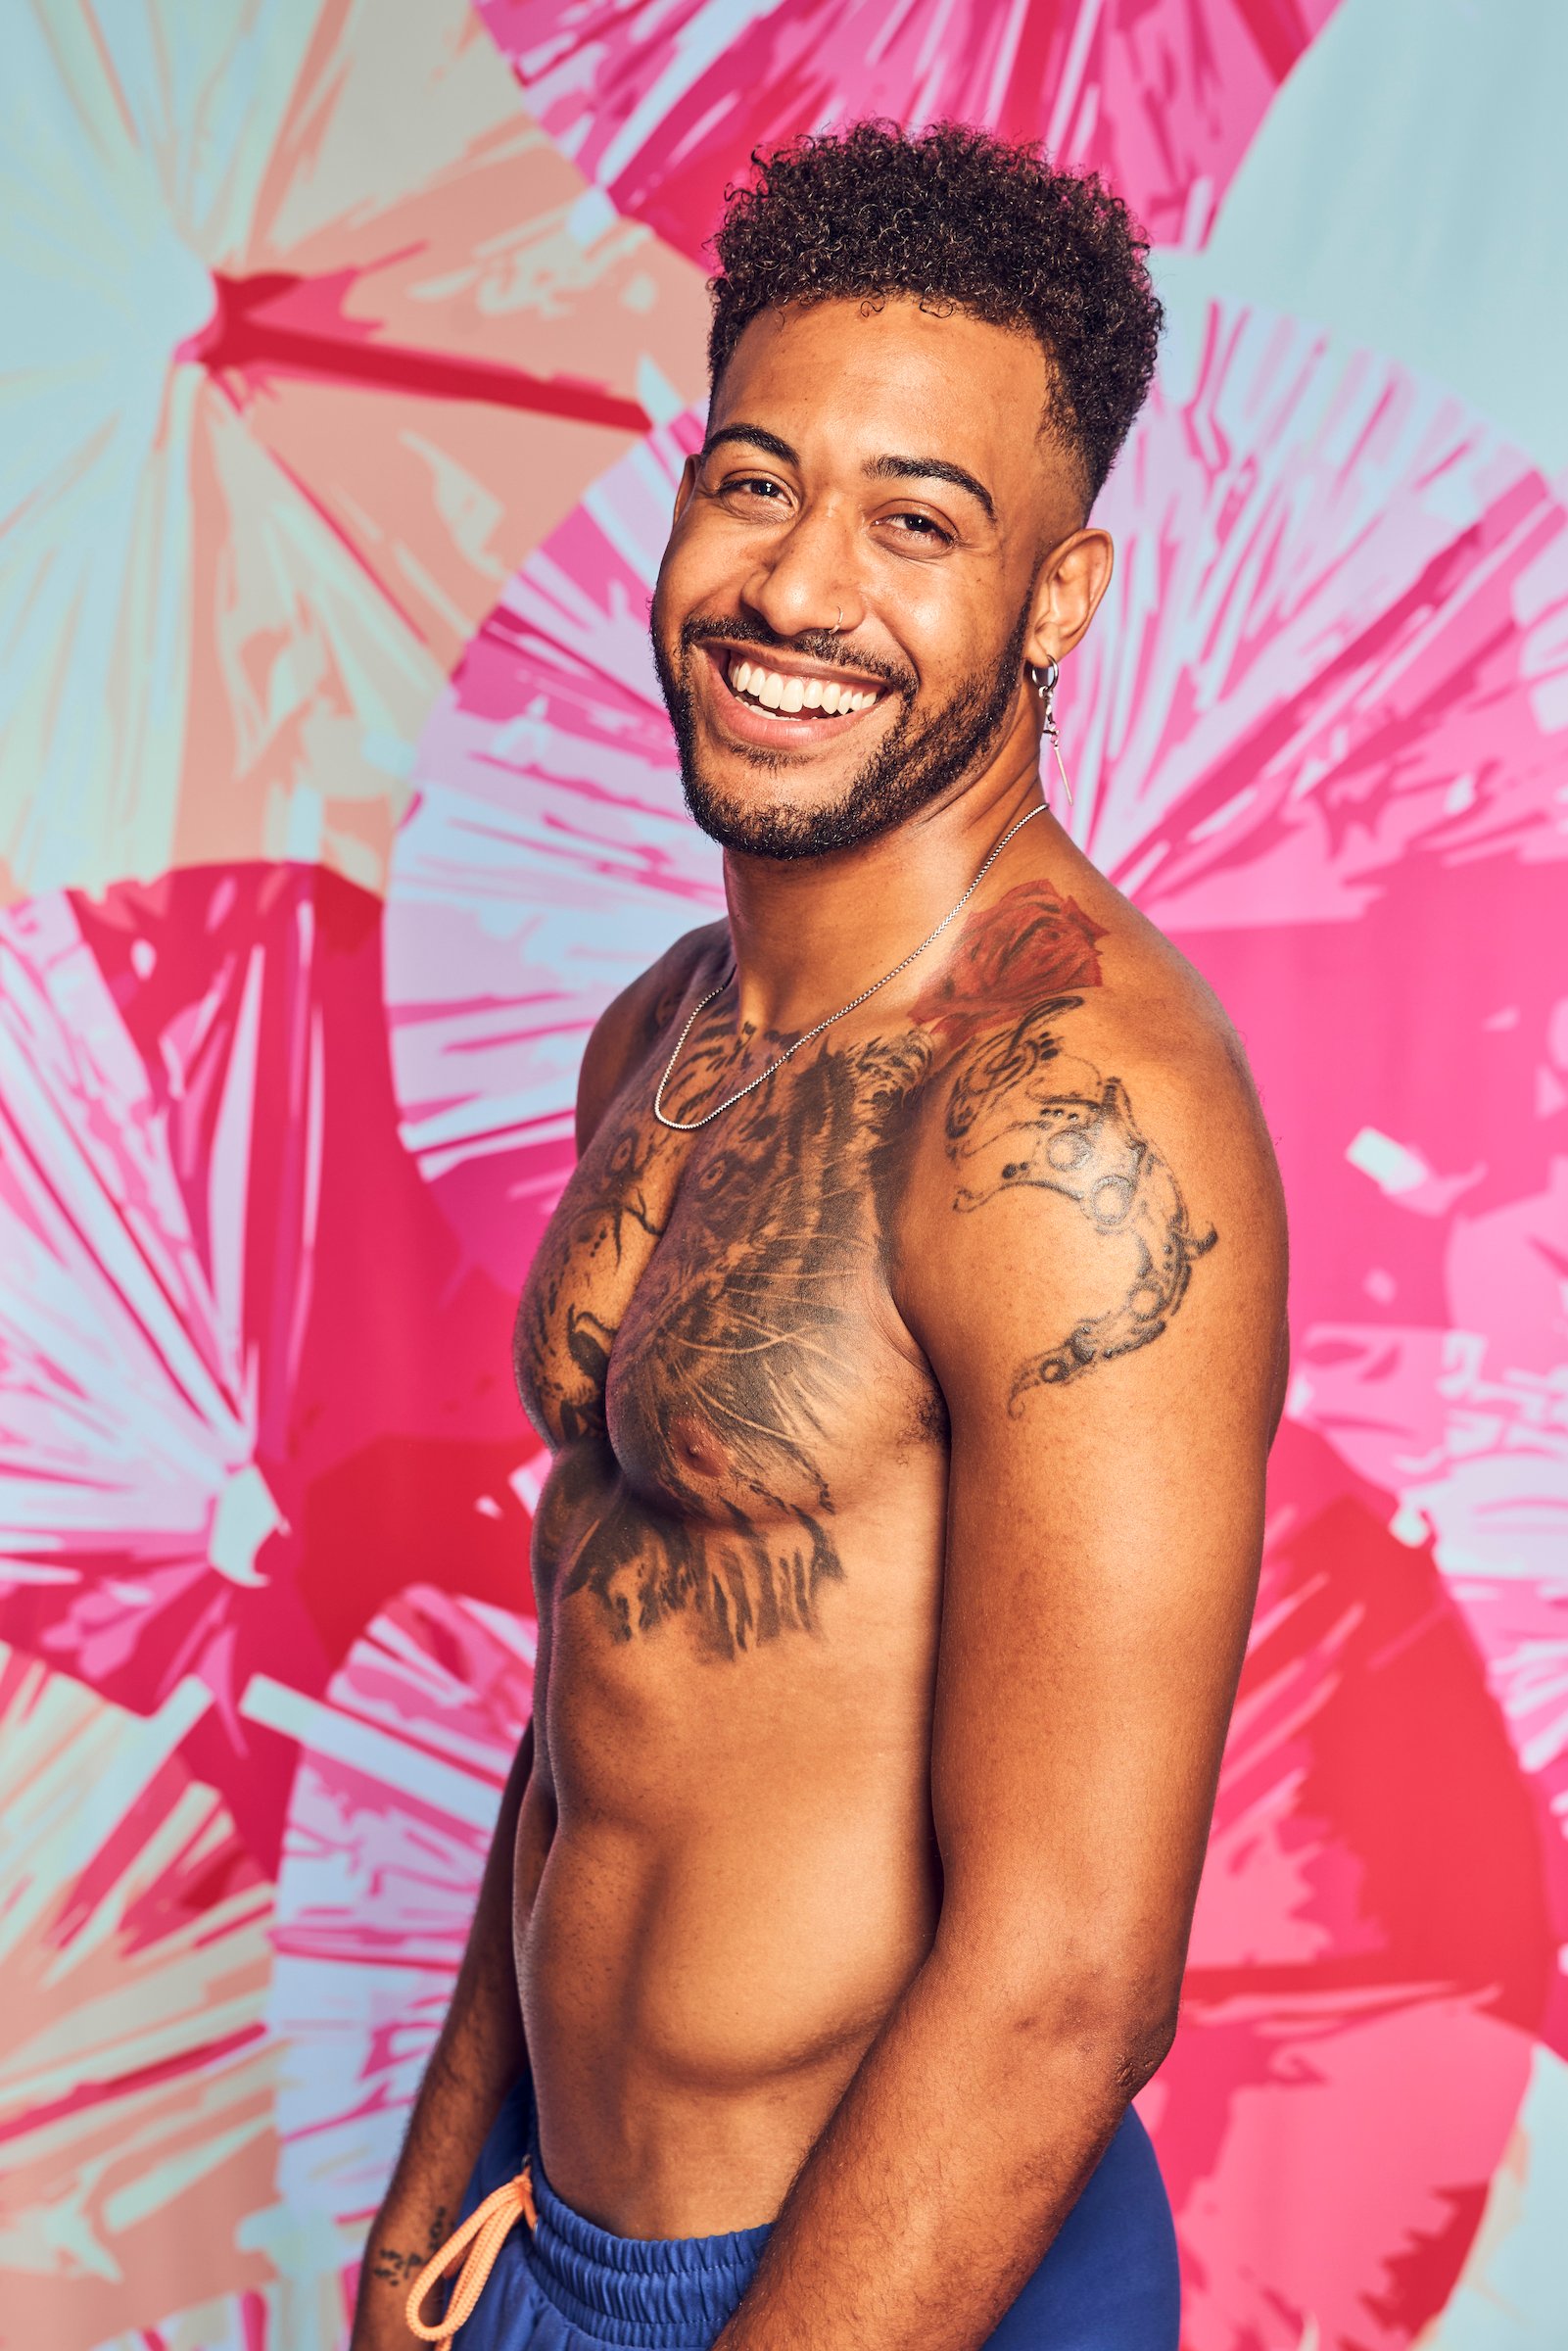 Javonny Vega, a contestant on CBS 'The Challenge,' smiling and shirtless against a pink background